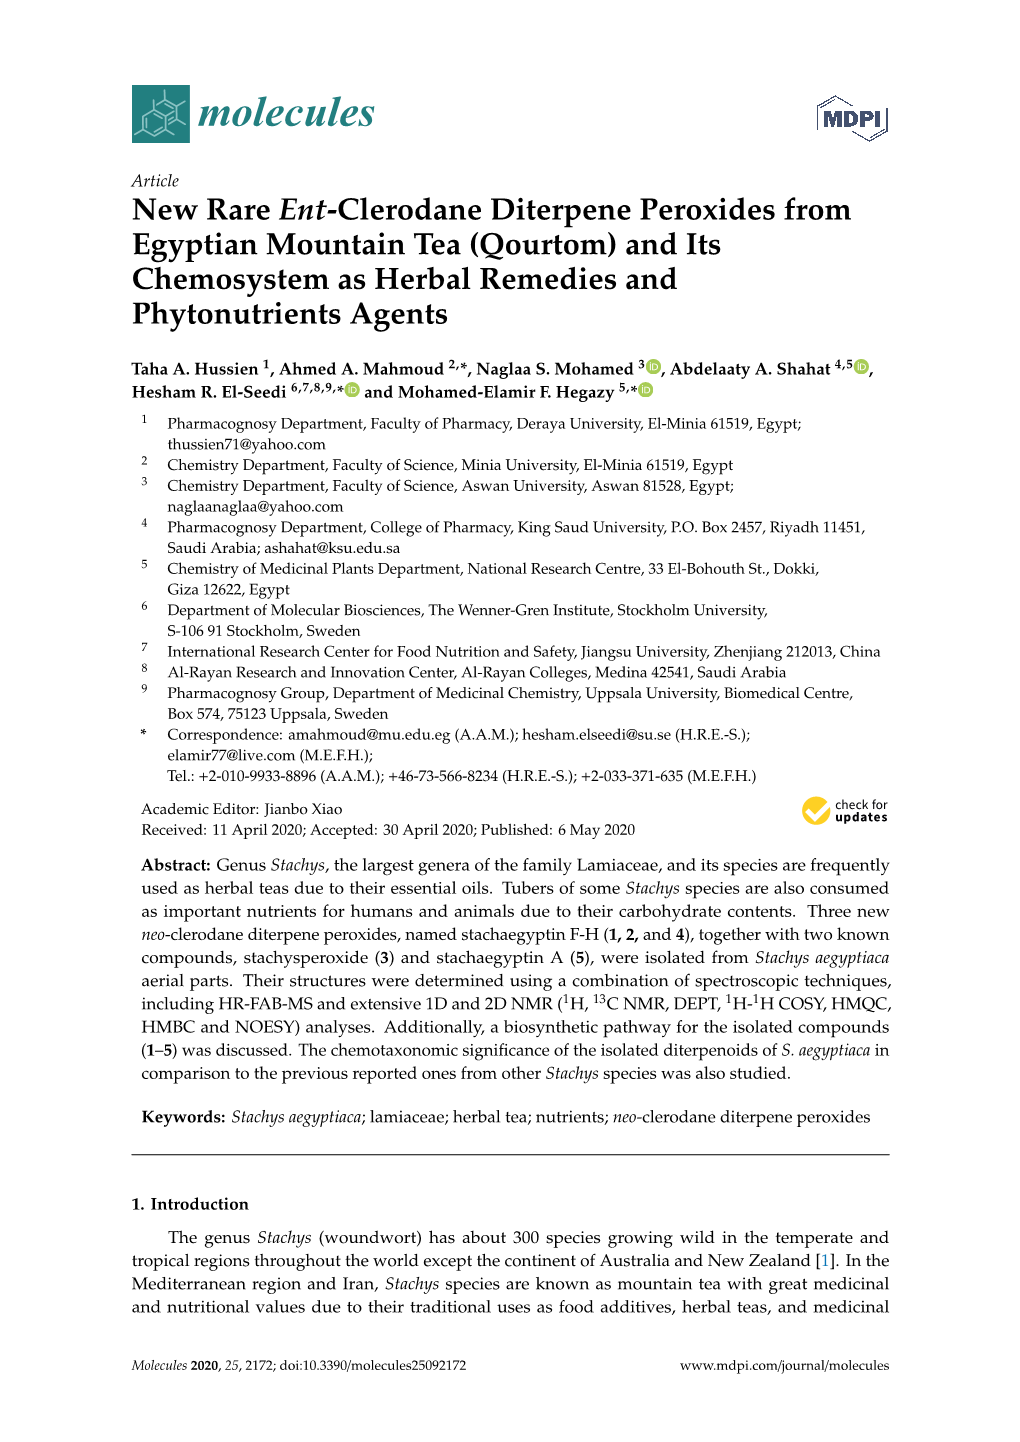 New Rare Ent-Clerodane Diterpene Peroxides from Egyptian Mountain Tea (Qourtom) and Its Chemosystem As Herbal Remedies and Phytonutrients Agents